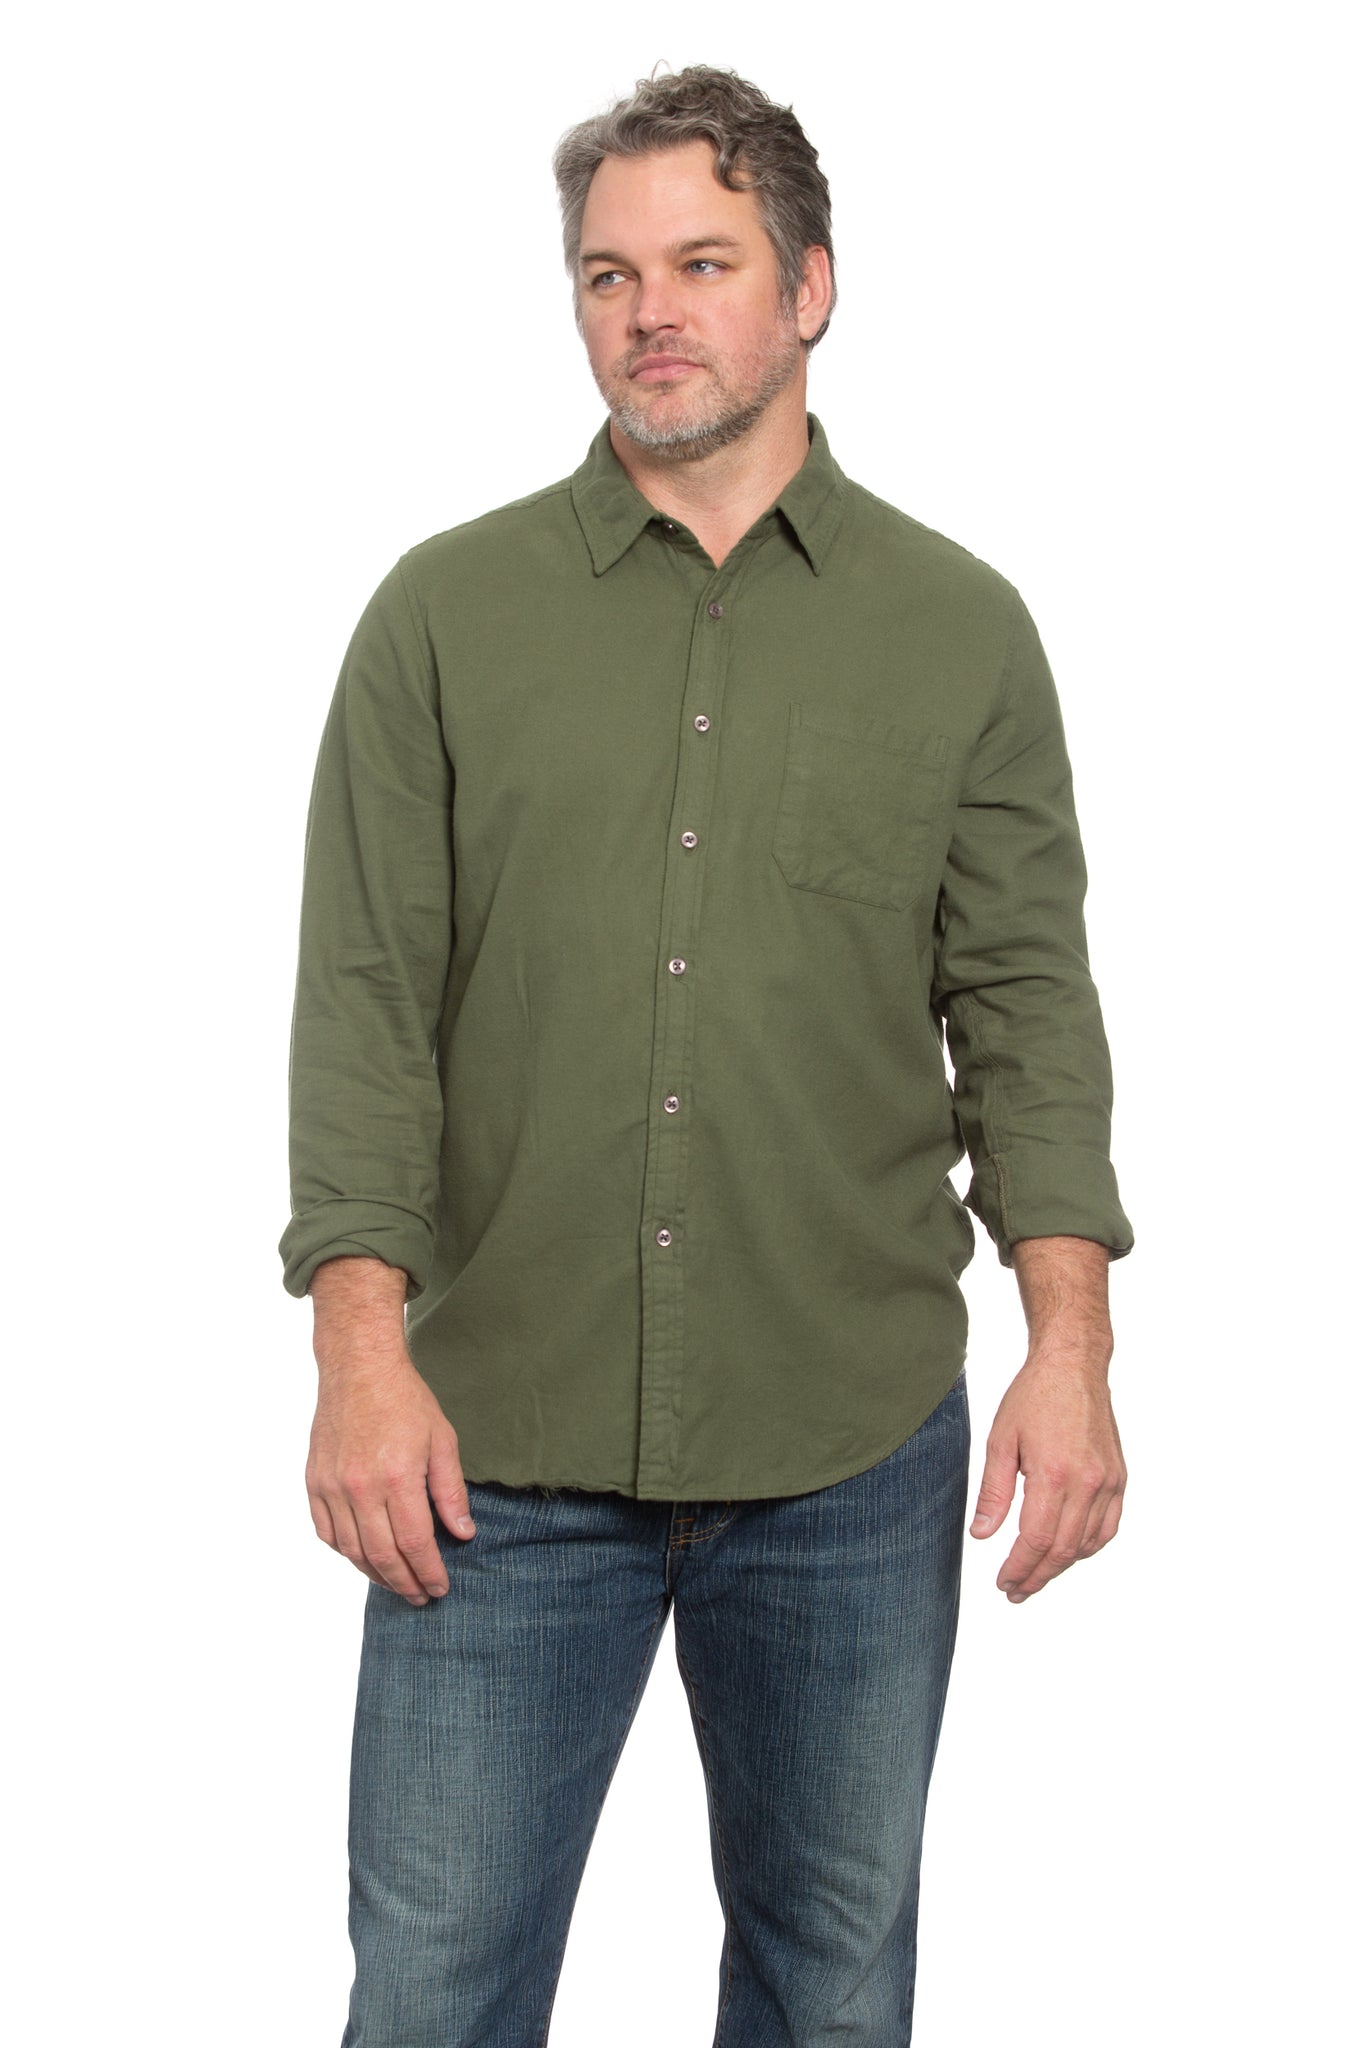 Men's Army Flannel Shirt